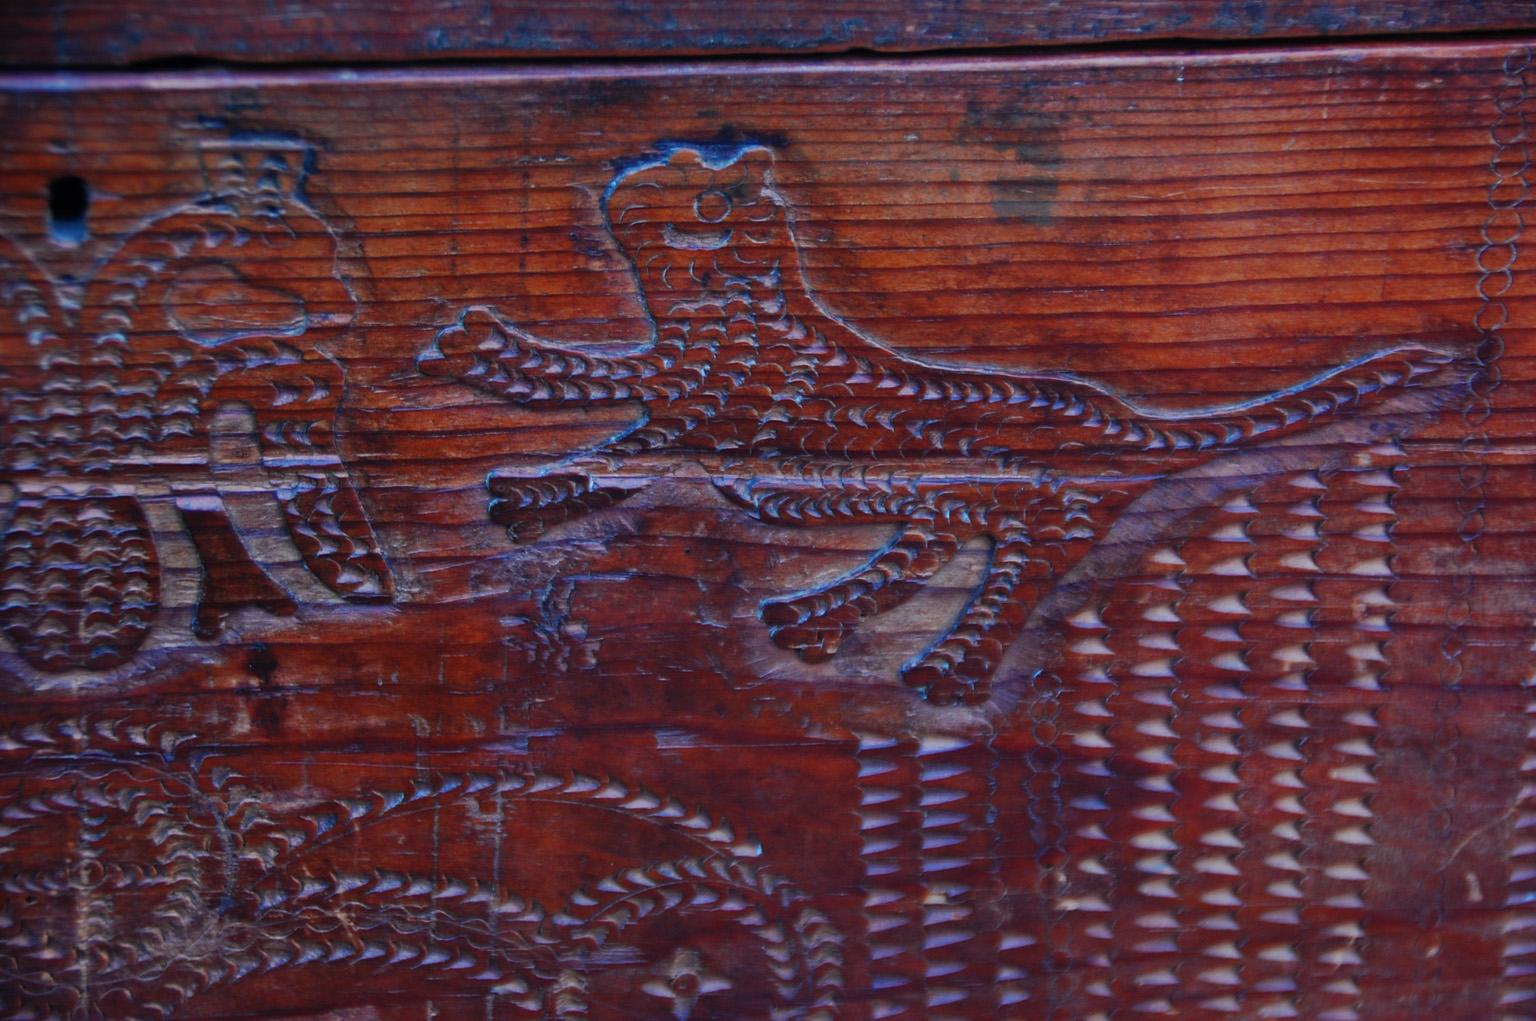 Mexican Mixteca 19th Century Wedding Chest Jaguar and Crowned Eagle Carvings Arched Top